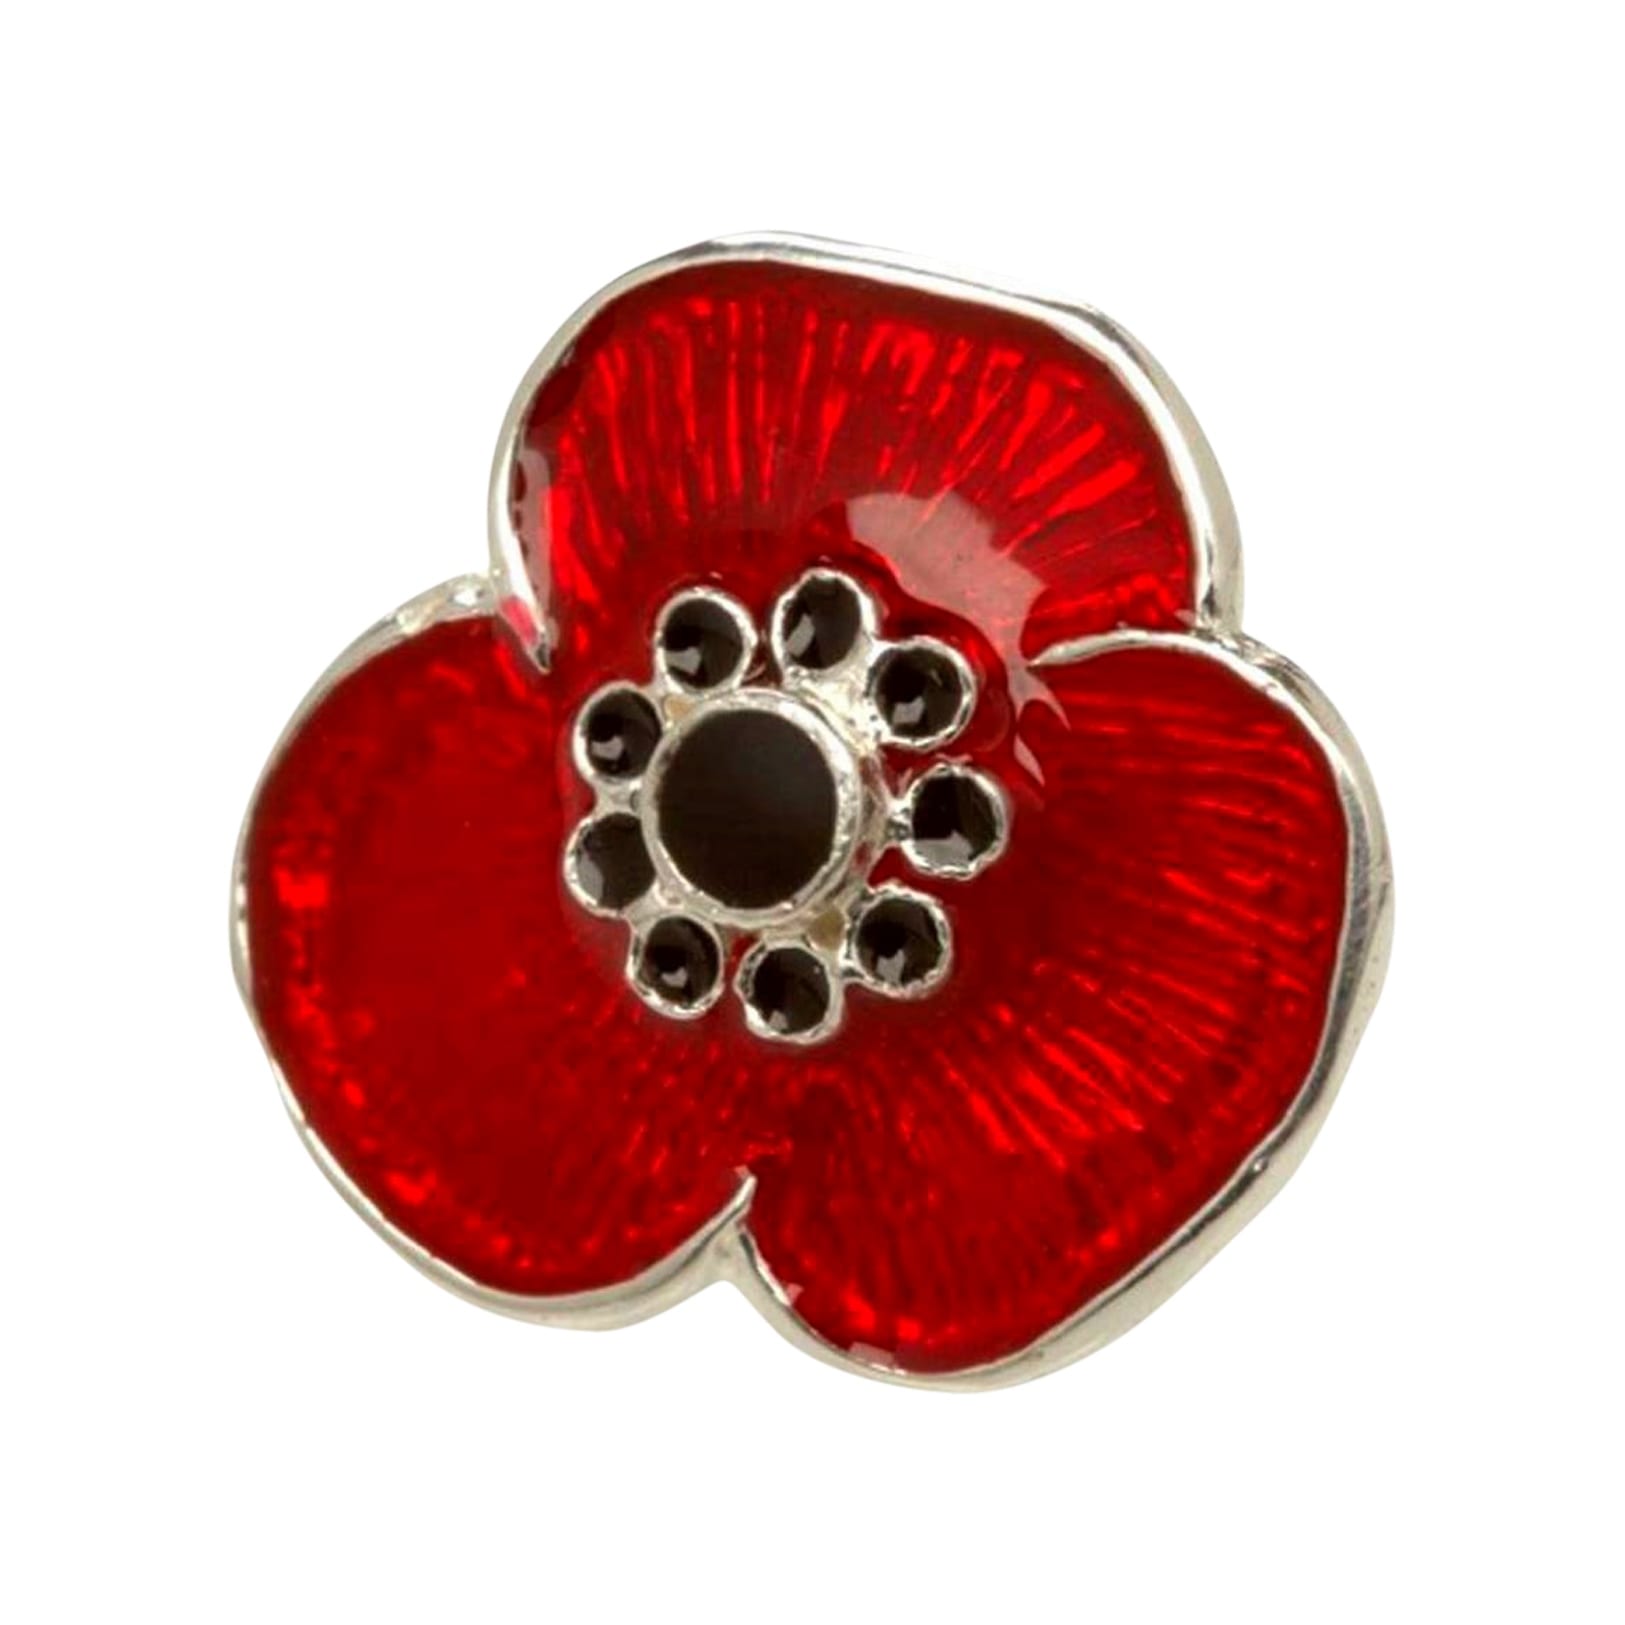 Sterling Silver Remembrance Poppy Pin Lest We Forget Uk